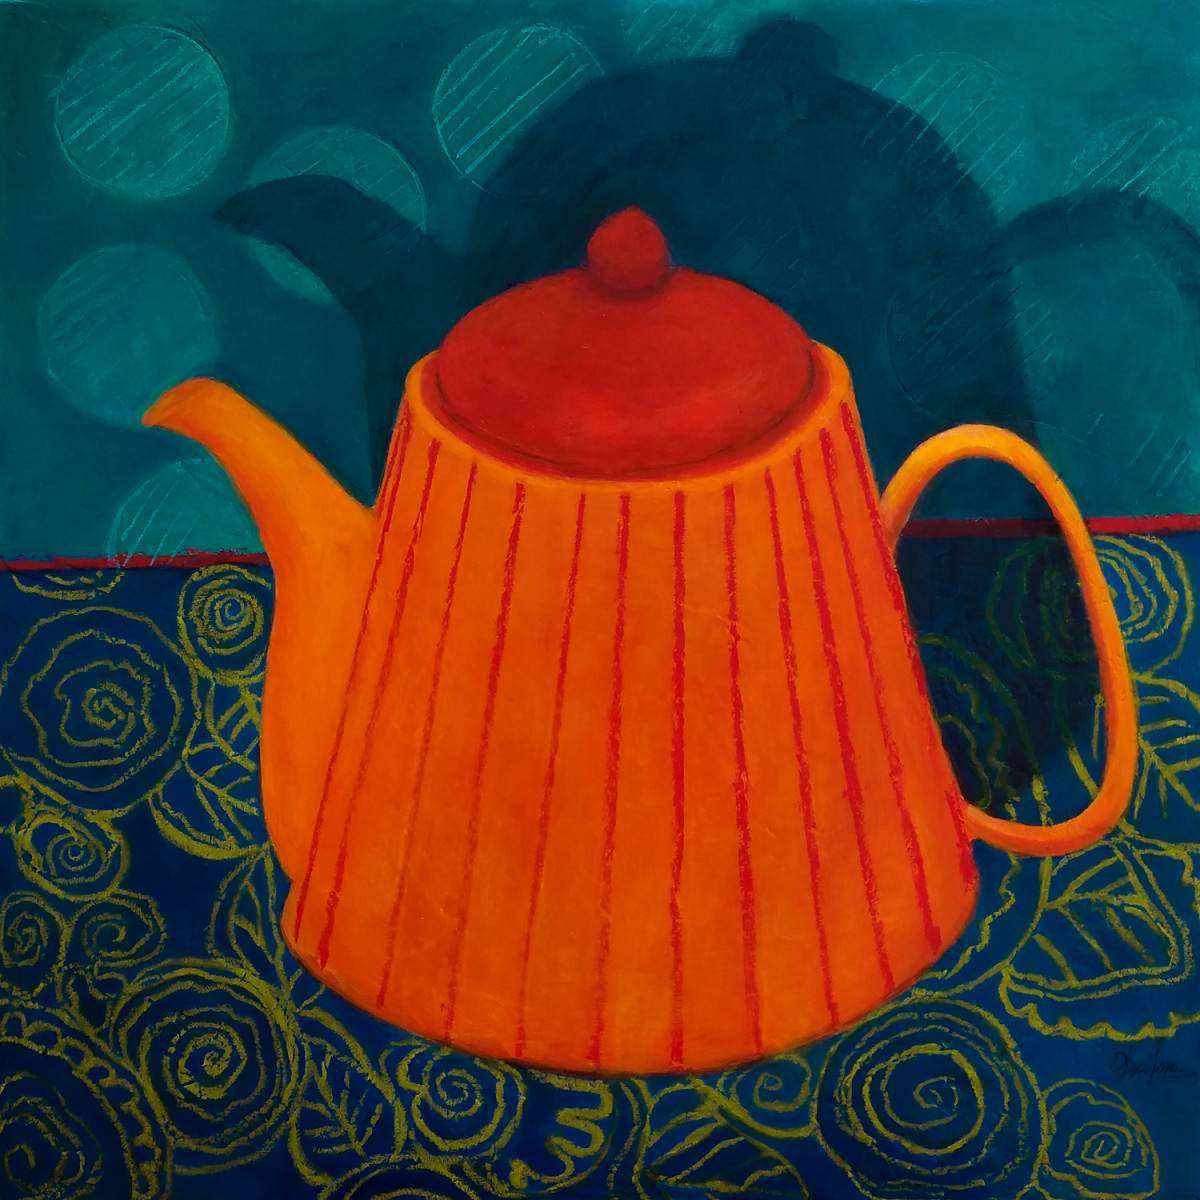 Where There Is Tea There Is A Lot of Hope by Olga Lora 